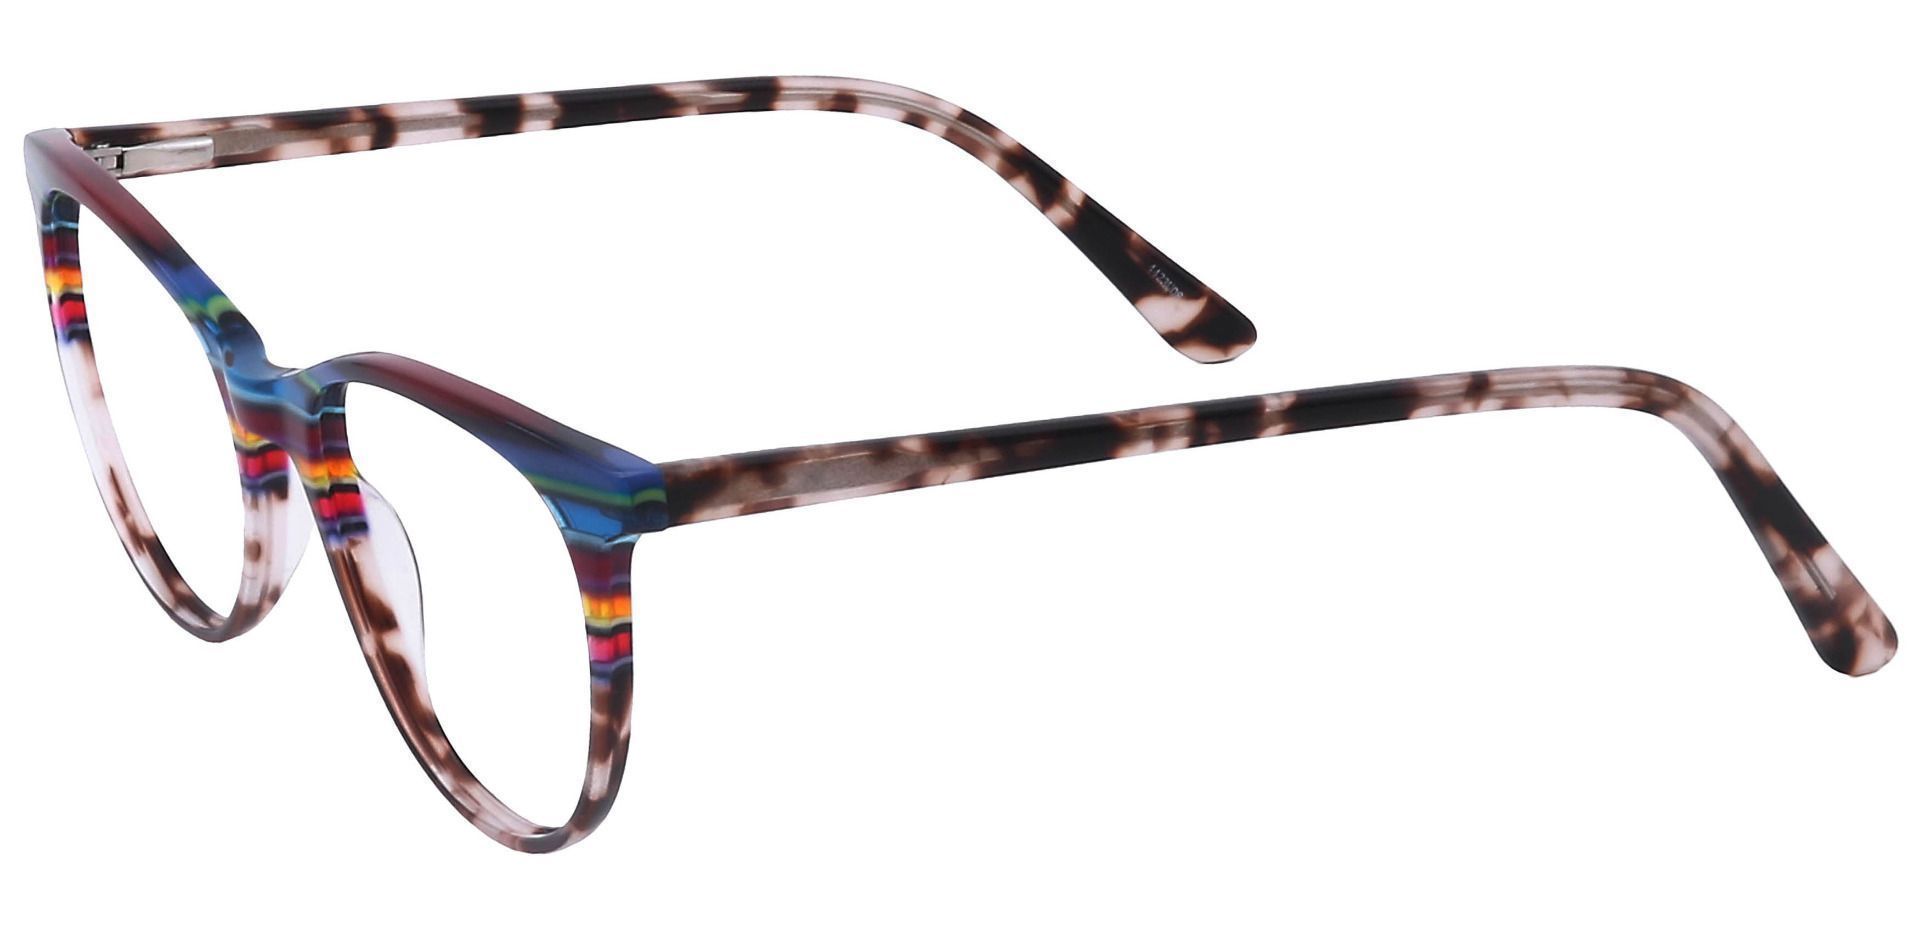 Patagonia Oval Lined Bifocal Glasses - Multi Colored Stripes